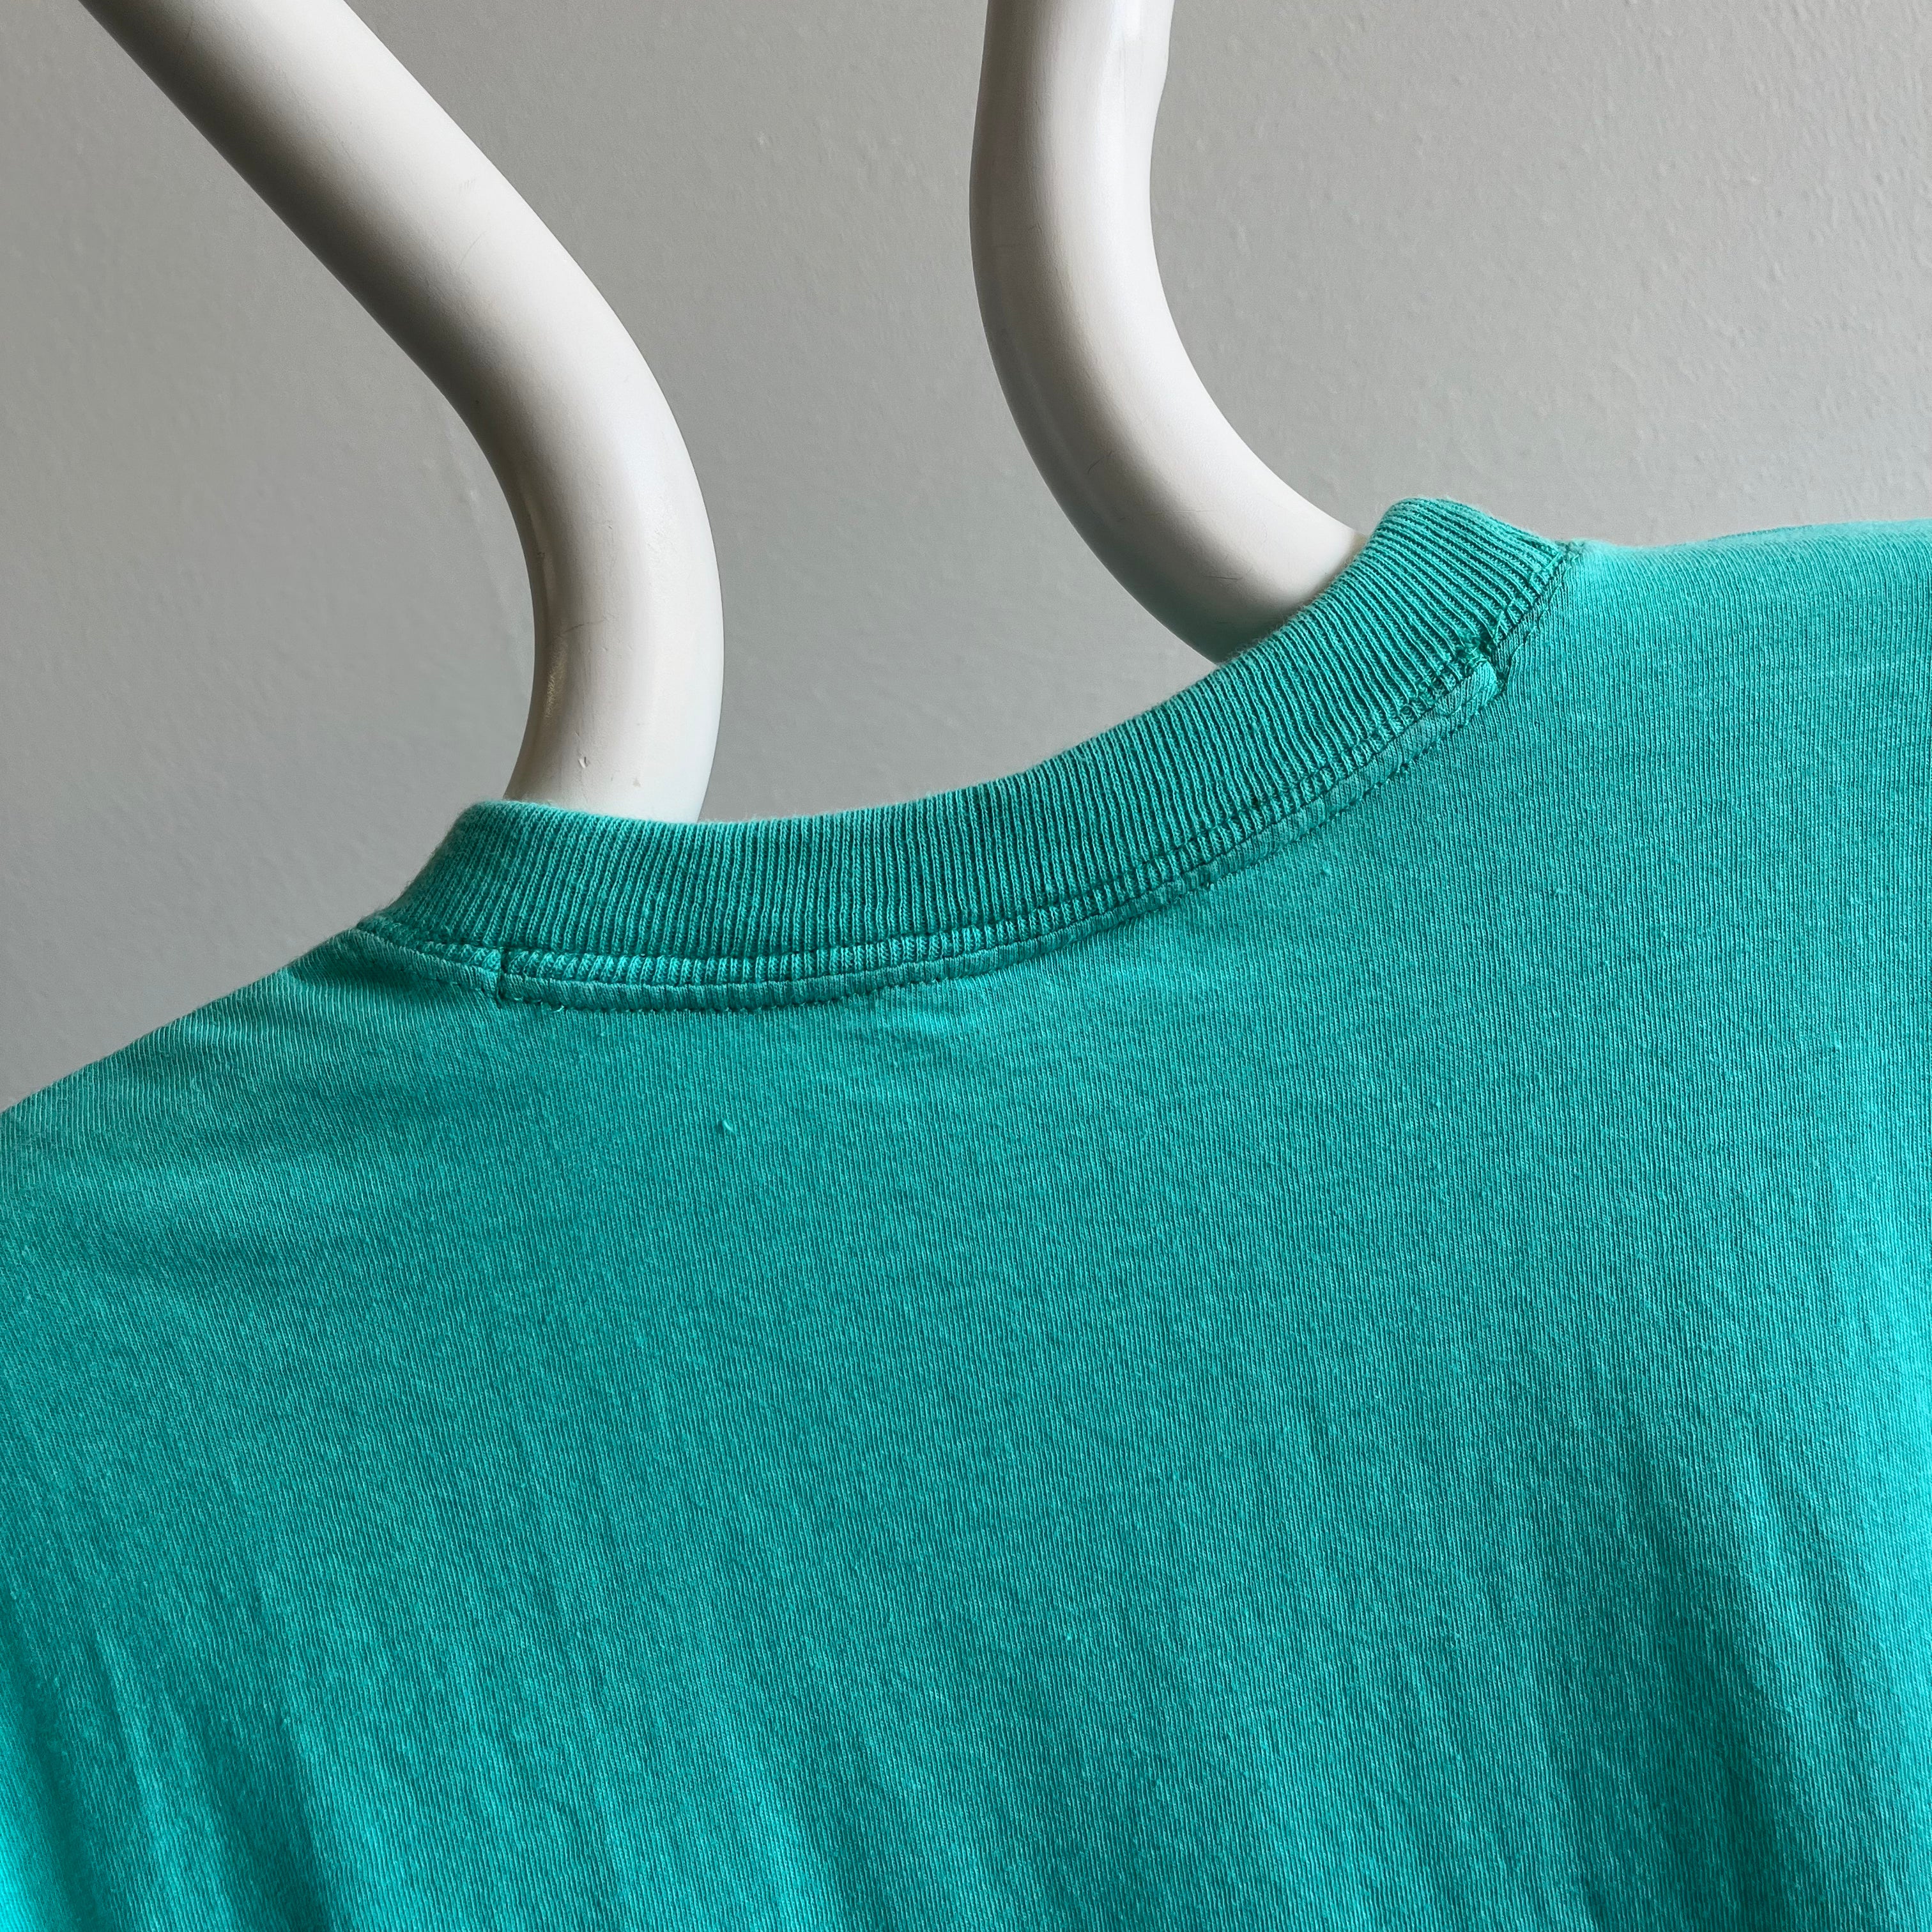 1990s Blank Teal Cotton T-Shirt